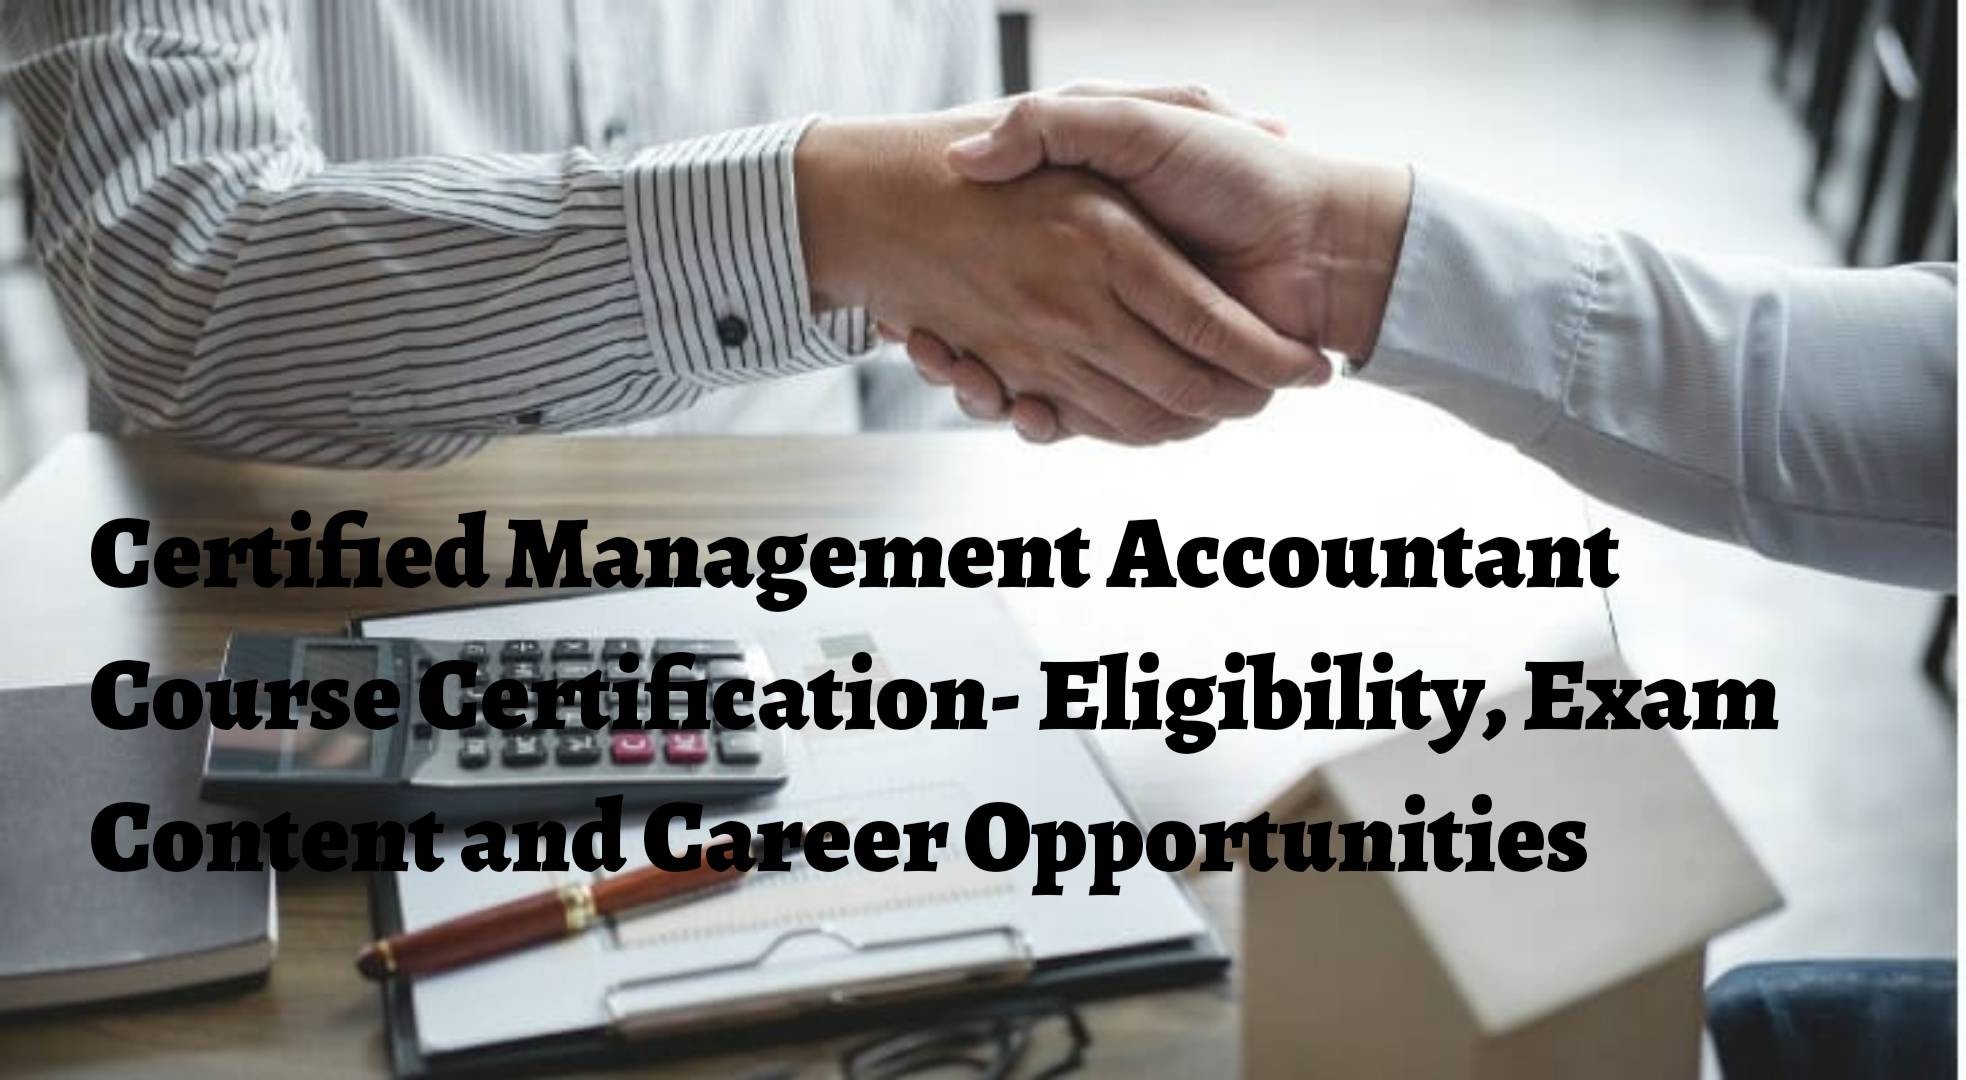 Certified Management Accountant Course Certification- Eligibility, Exam Content and Career Opportunities